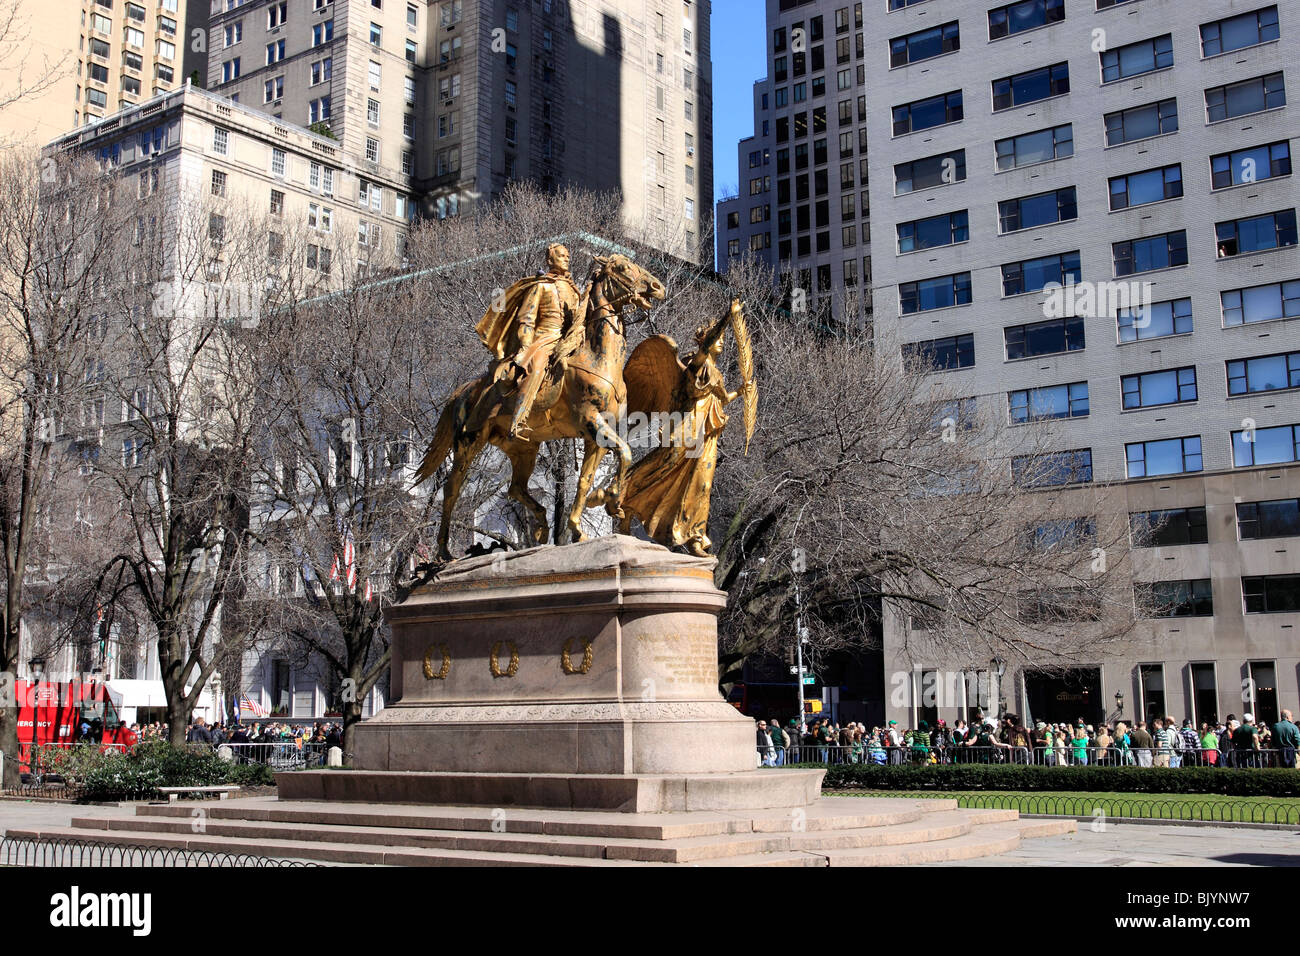 Statue of Union Civil War General William Tecumseh Sherman, Grand Army Plaza, Central Park So. at 59th and 5th Ave New York City Stock Photo